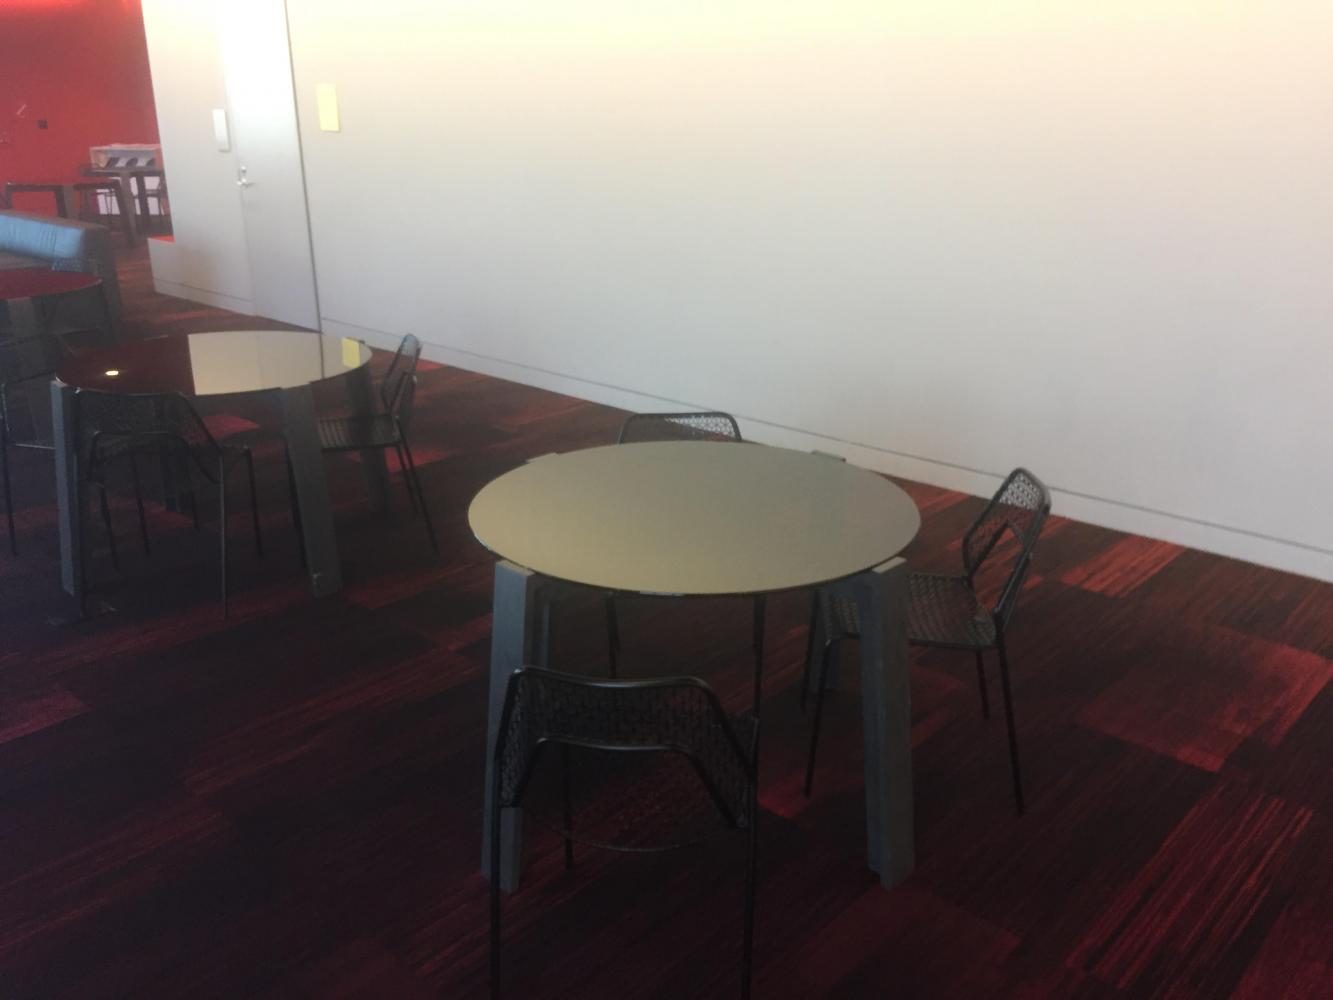 Some of the Huss Center tables should be moved into the Upper Library